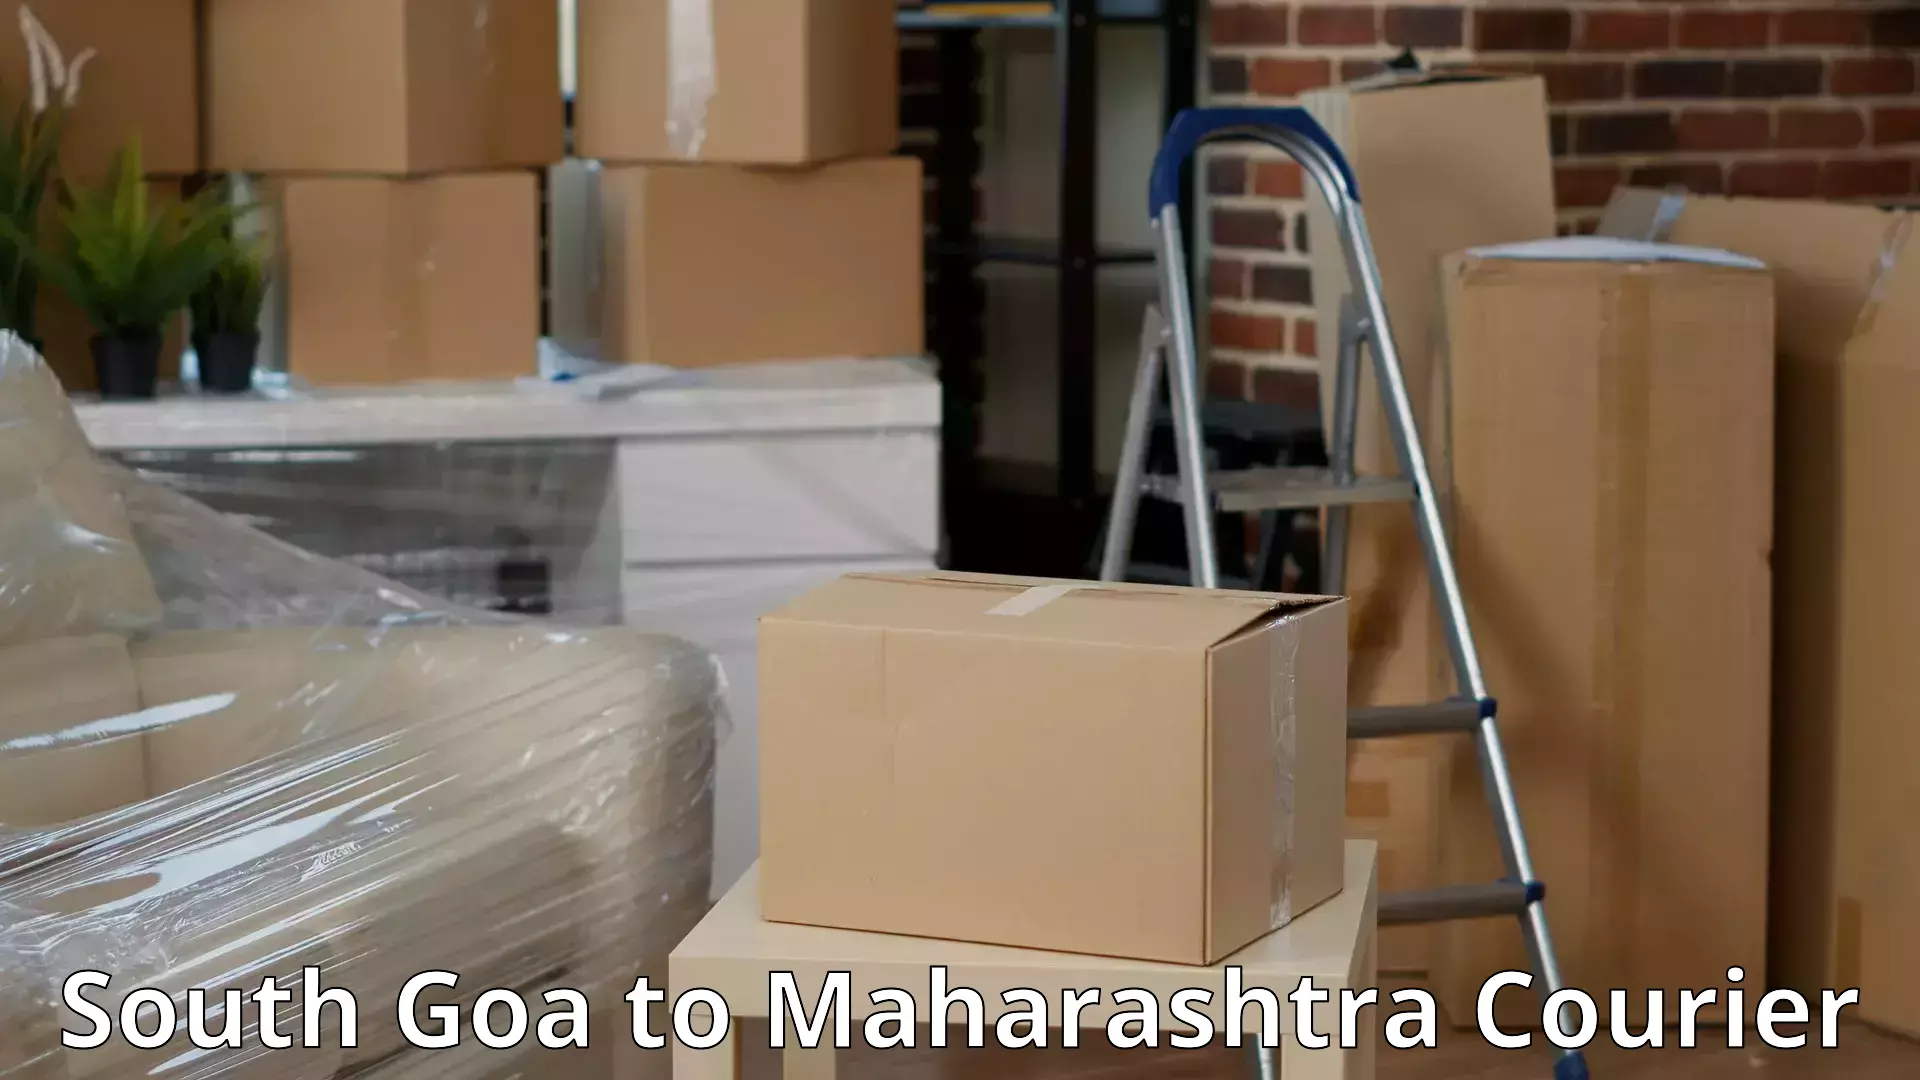 Moving and storage services South Goa to Lonikand